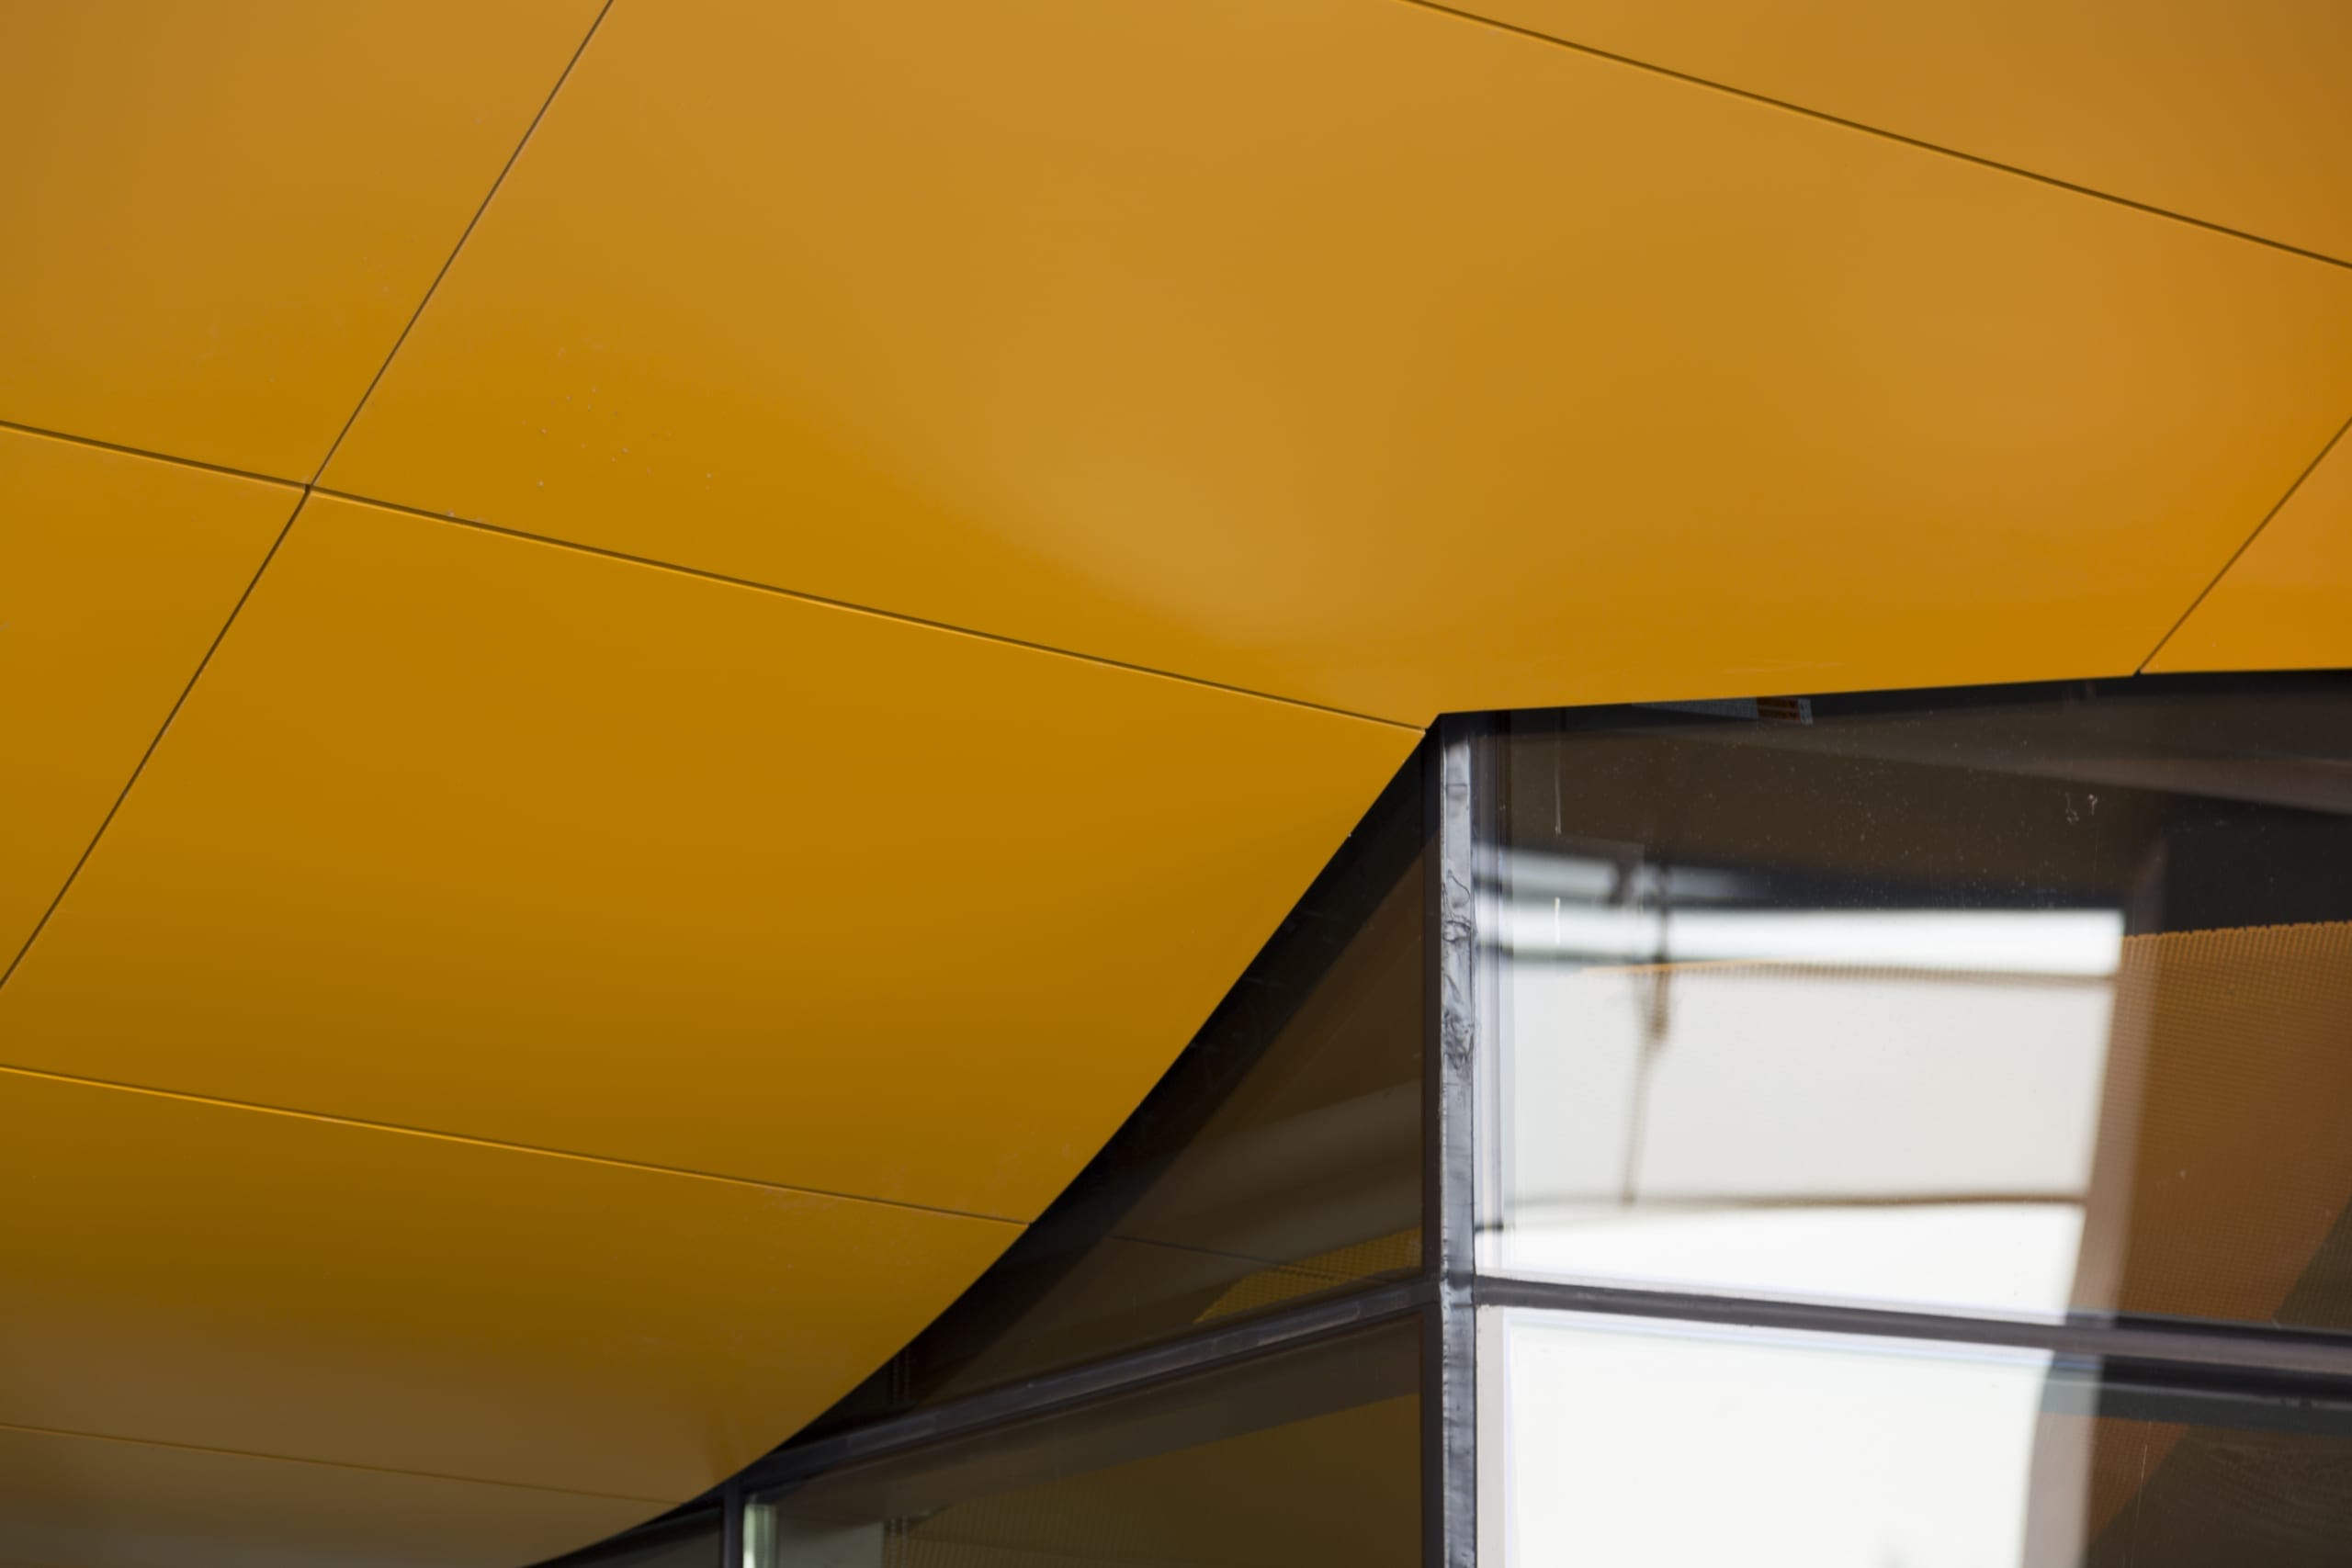 Detail of the orange-painted aluminum soffit system used on Gates Hall at Cornell University.